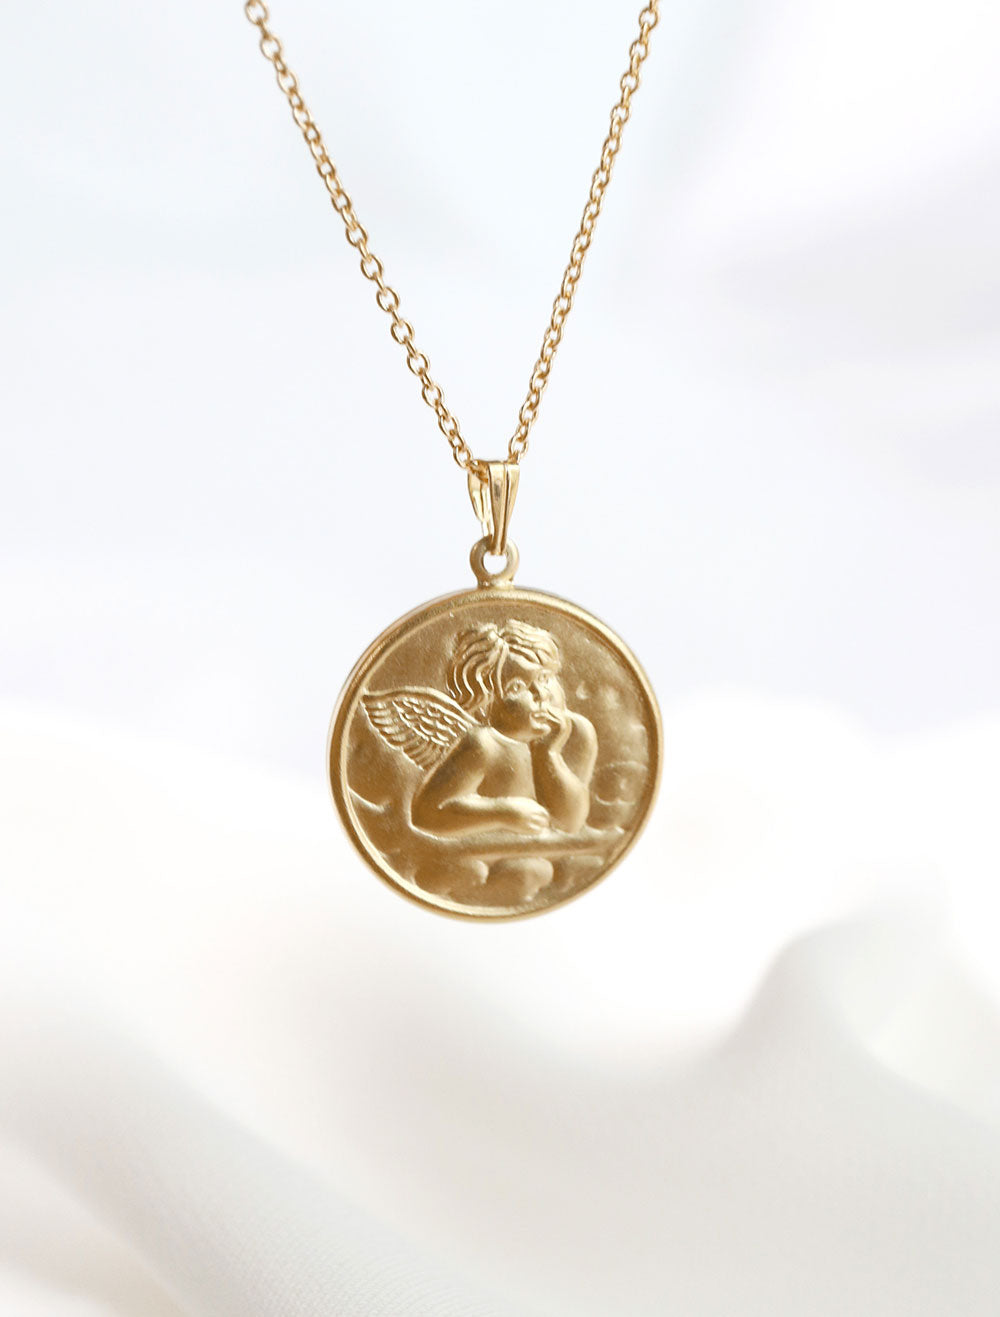 14k gold filled guardian angel coin pendant necklace